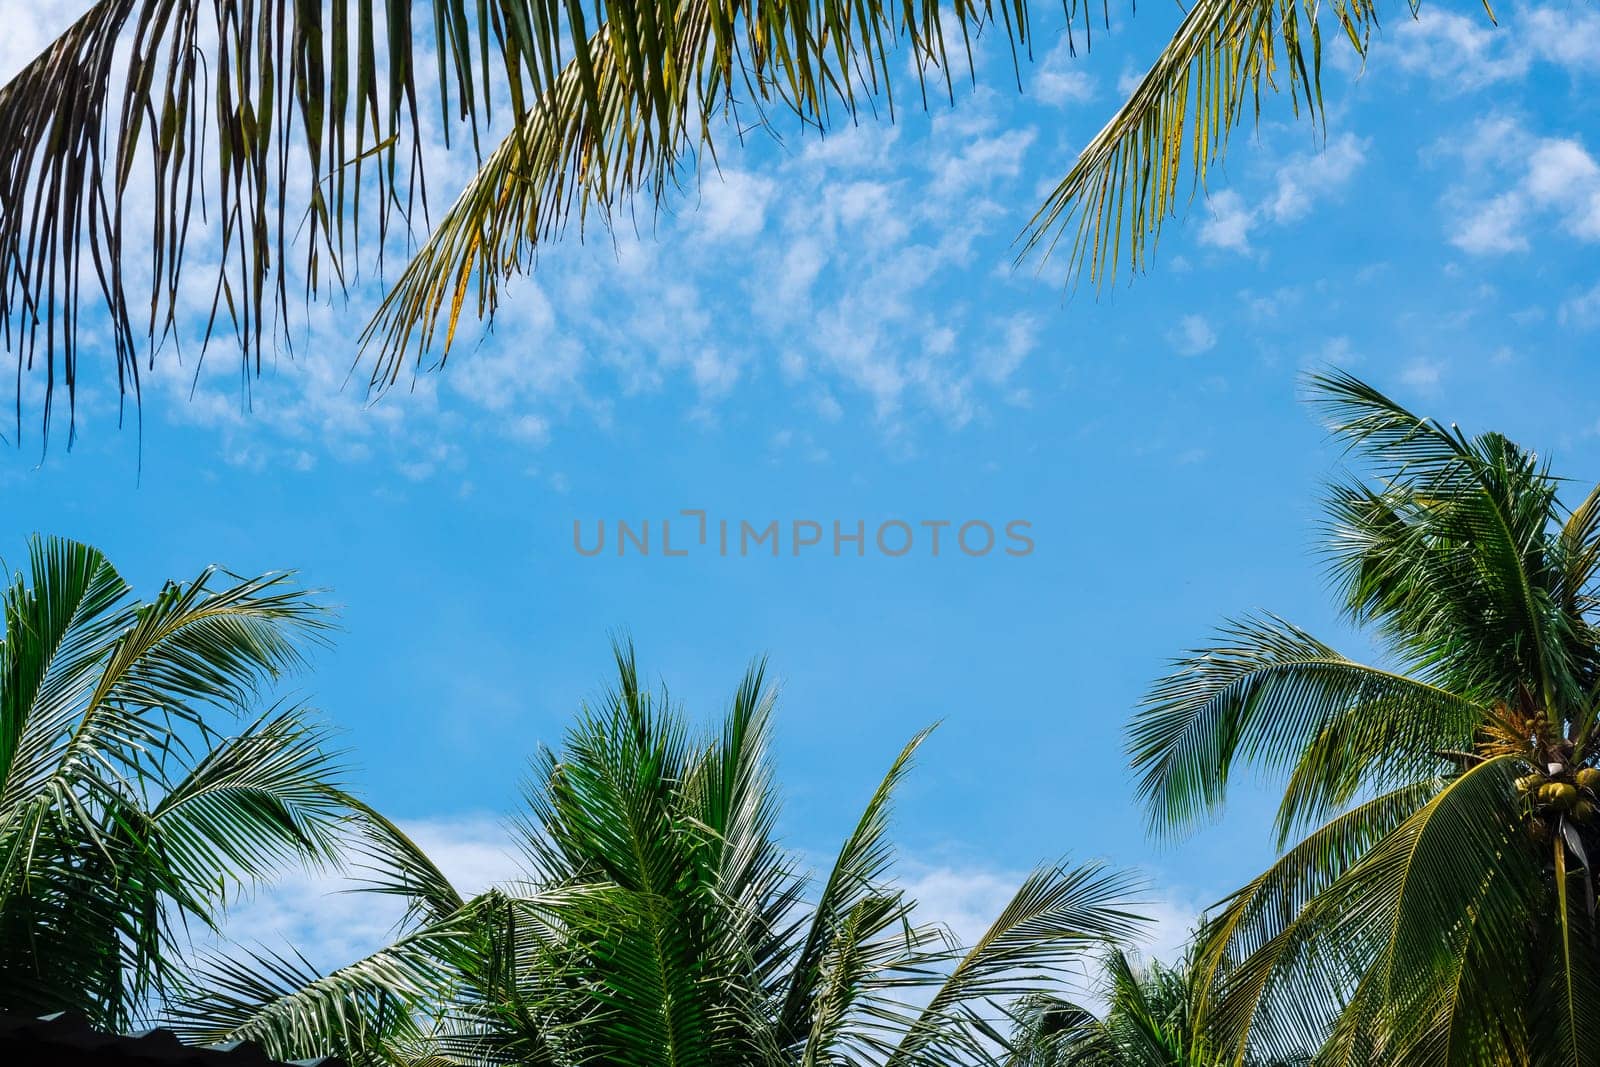 Coconut green tropical palm branches blue sky white clouds abstract background bright shiny sun day beautiful nature summer. Joy happiness harmony tranquility calm life.